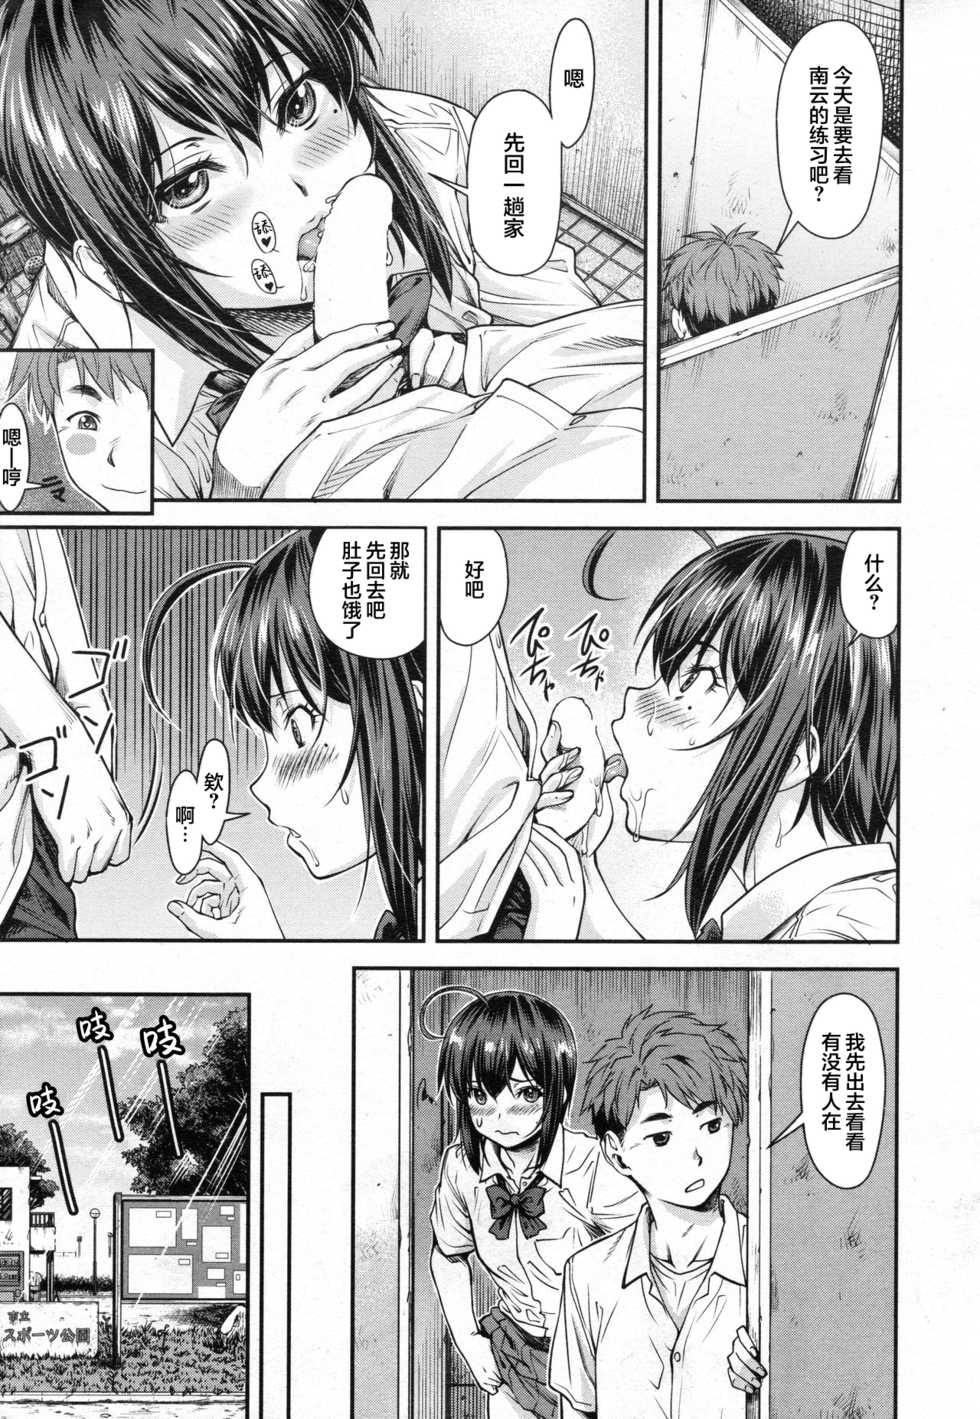 [Nagare Ippon] Kaname Date #10 (COMIC AUN 2020-08) [Chinese] [不可视汉化] [Digital] - Page 6